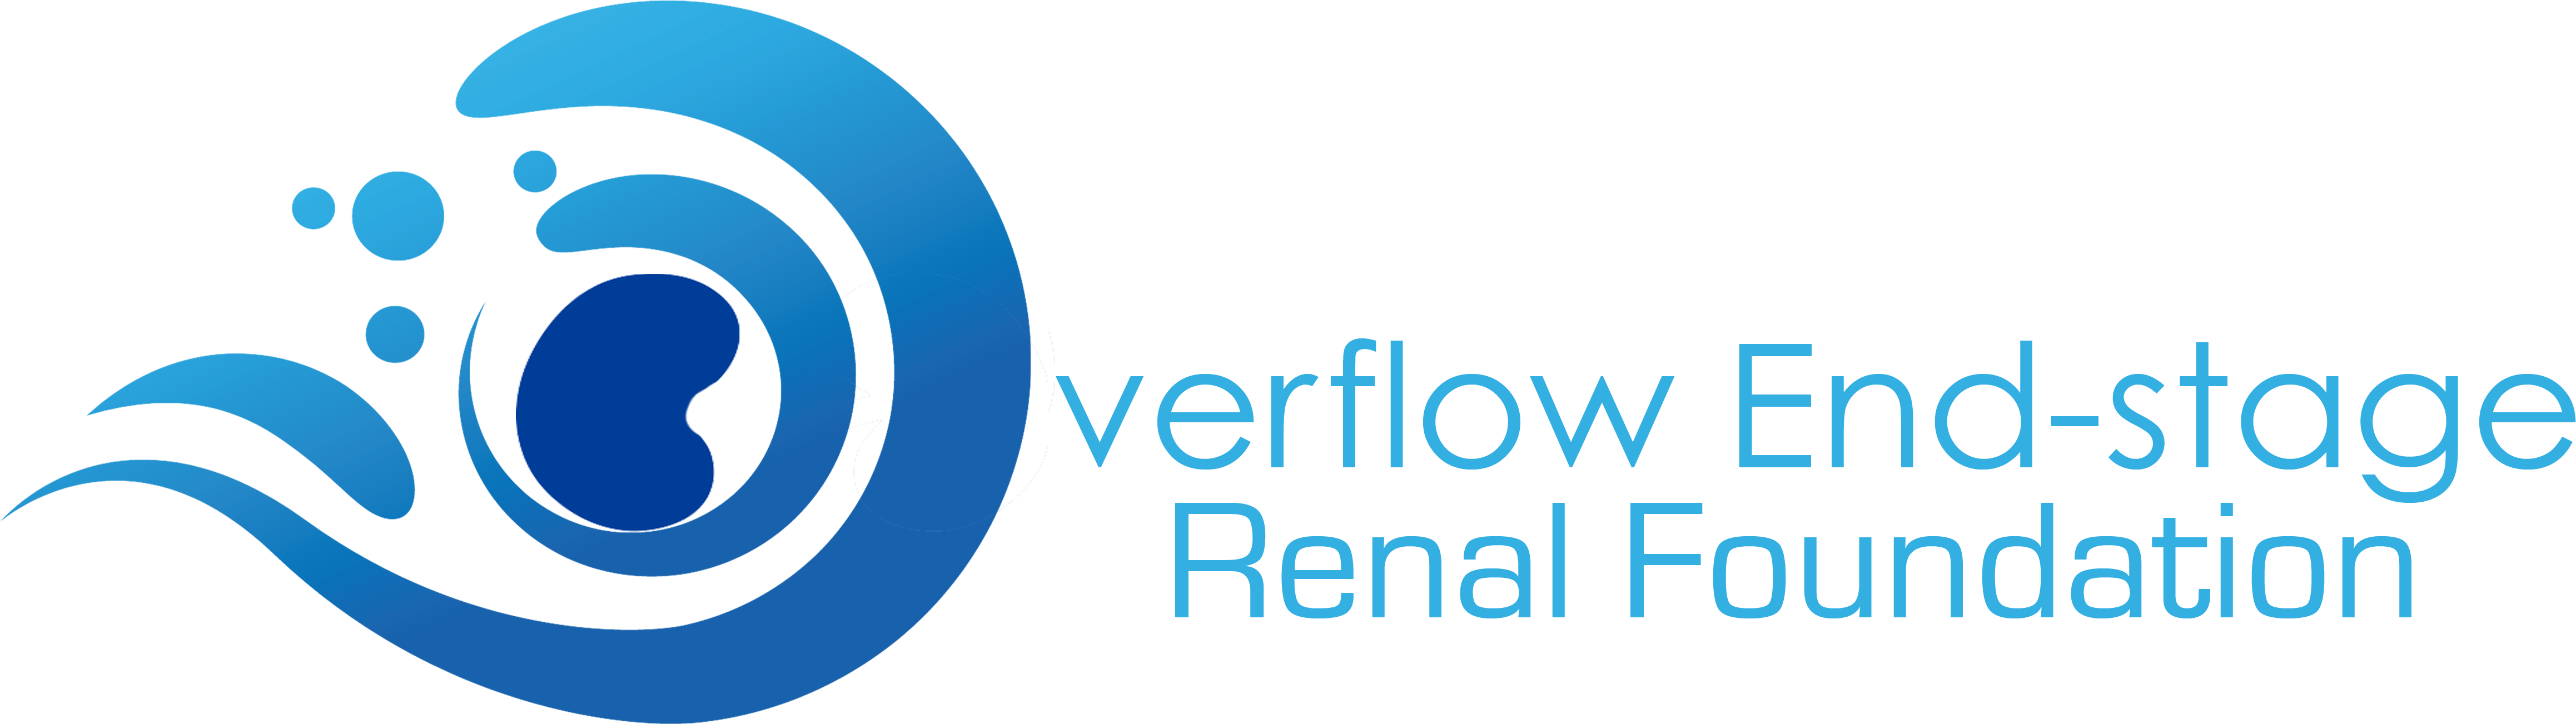 Overflow End-Stage Renal Foundation